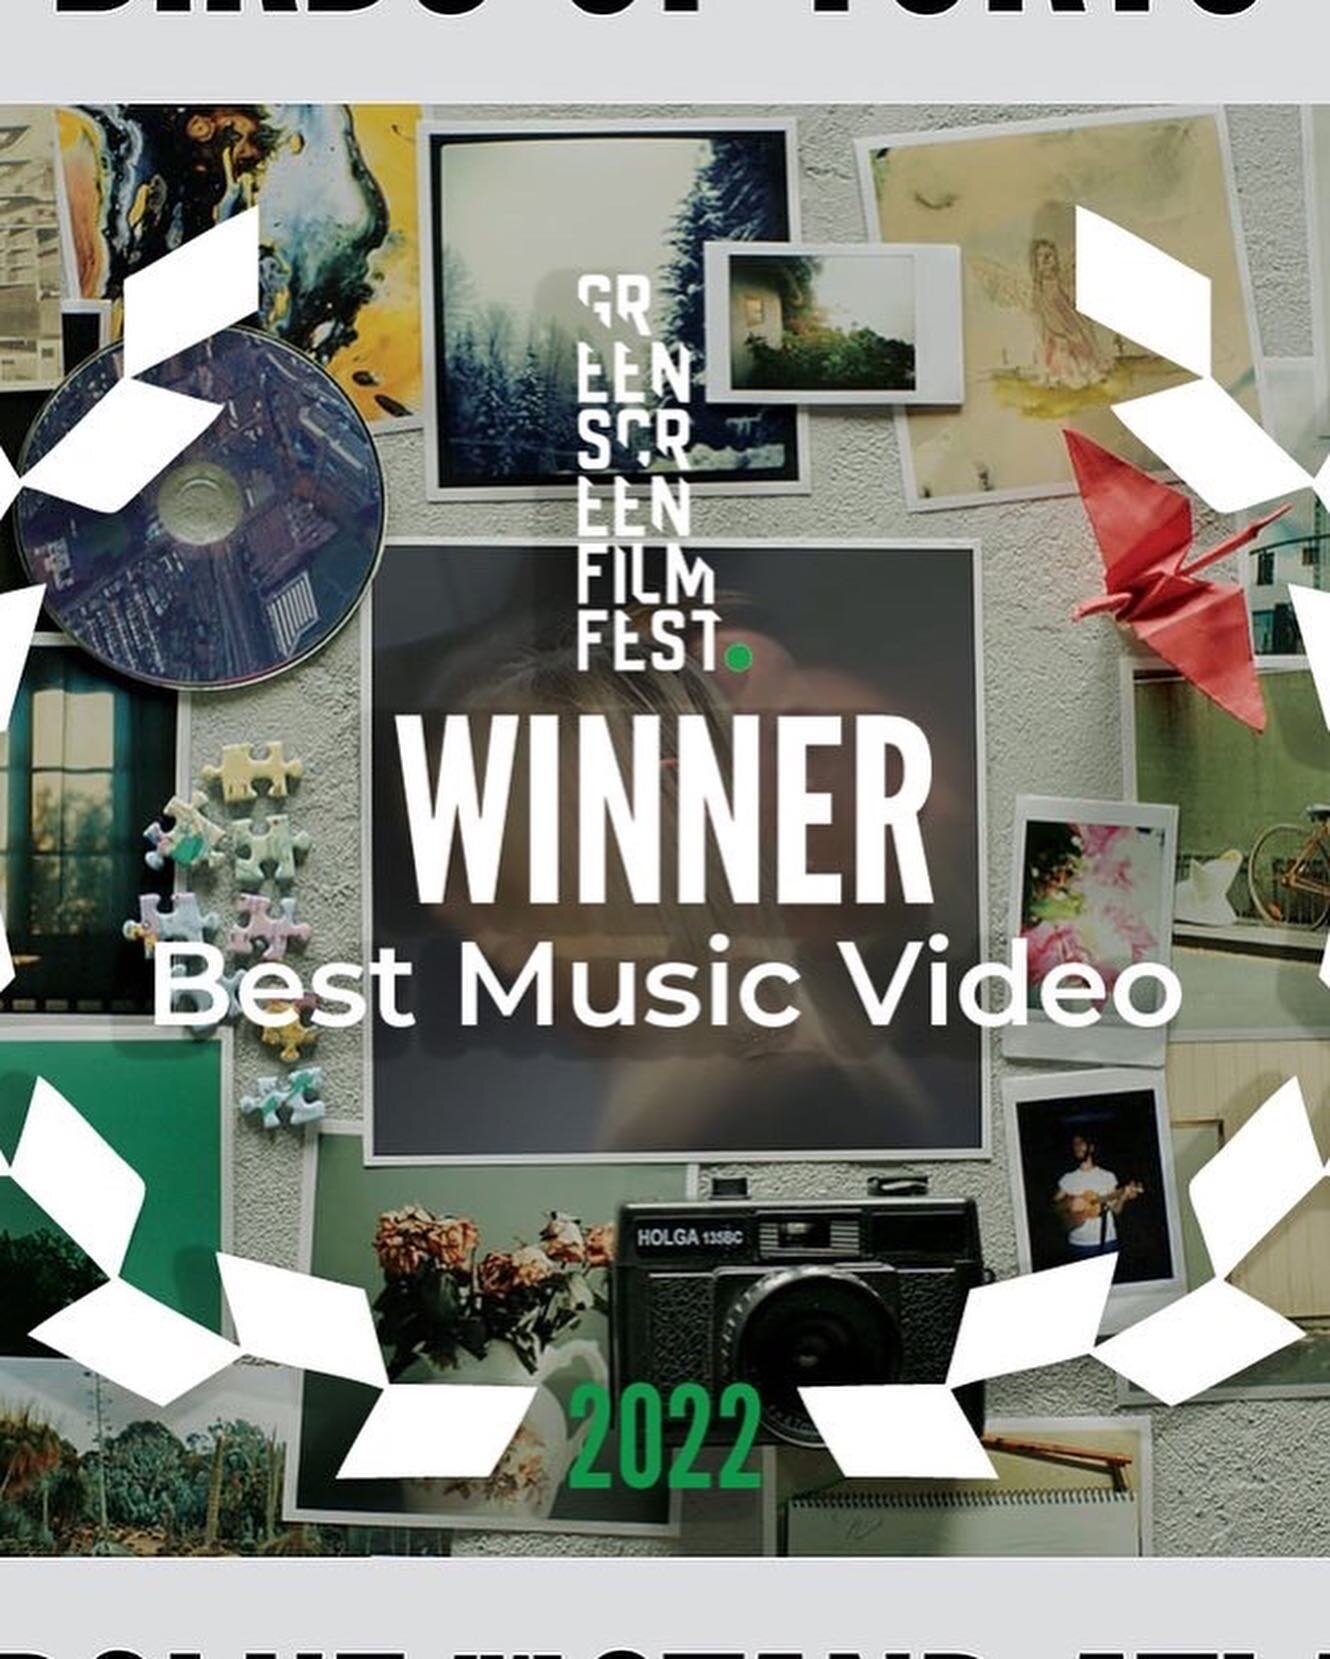 Huge congratulations to @lynchwood for Winner of the Best Music Video with the incredible Superglue music video for @birdsoftokyo @greenscreenfilmfest 💥💥💥

.
.
.
.
.
.
.
.
#shortfilm #winner #winning #filmfestival #bestmusic #bestmusicvideo #green